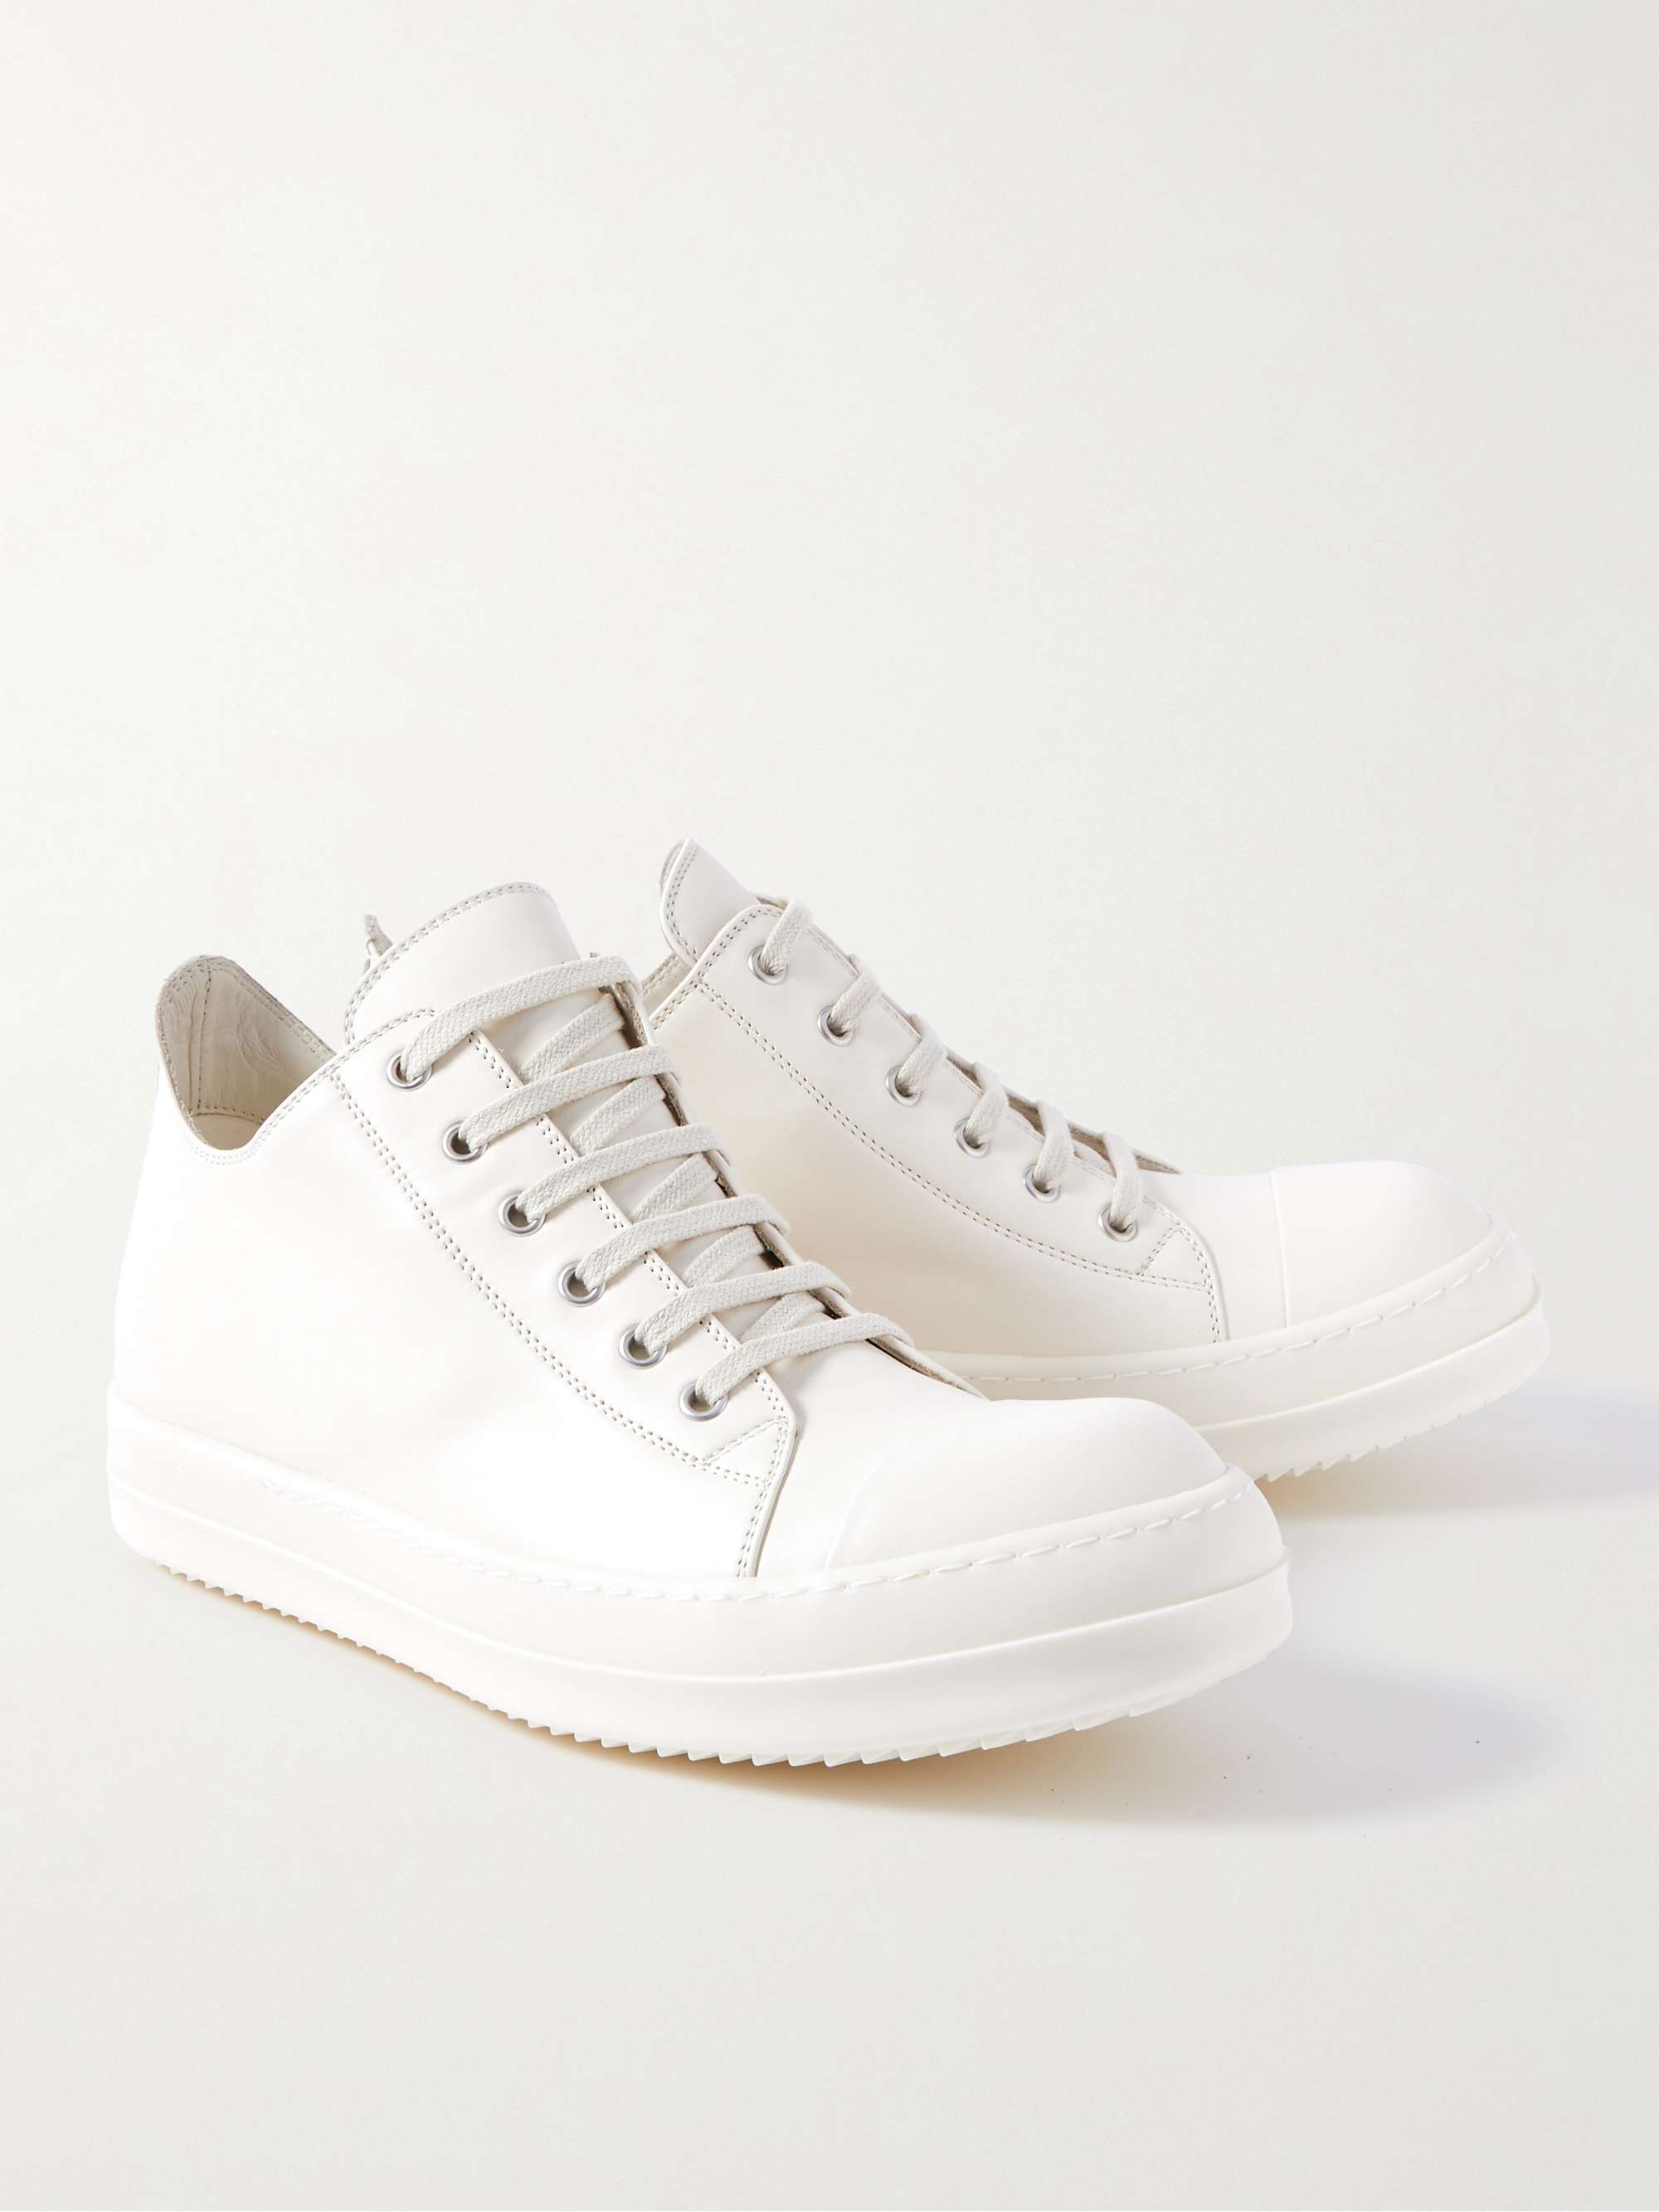 RICK OWENS Leather Sneakers for Men | MR PORTER